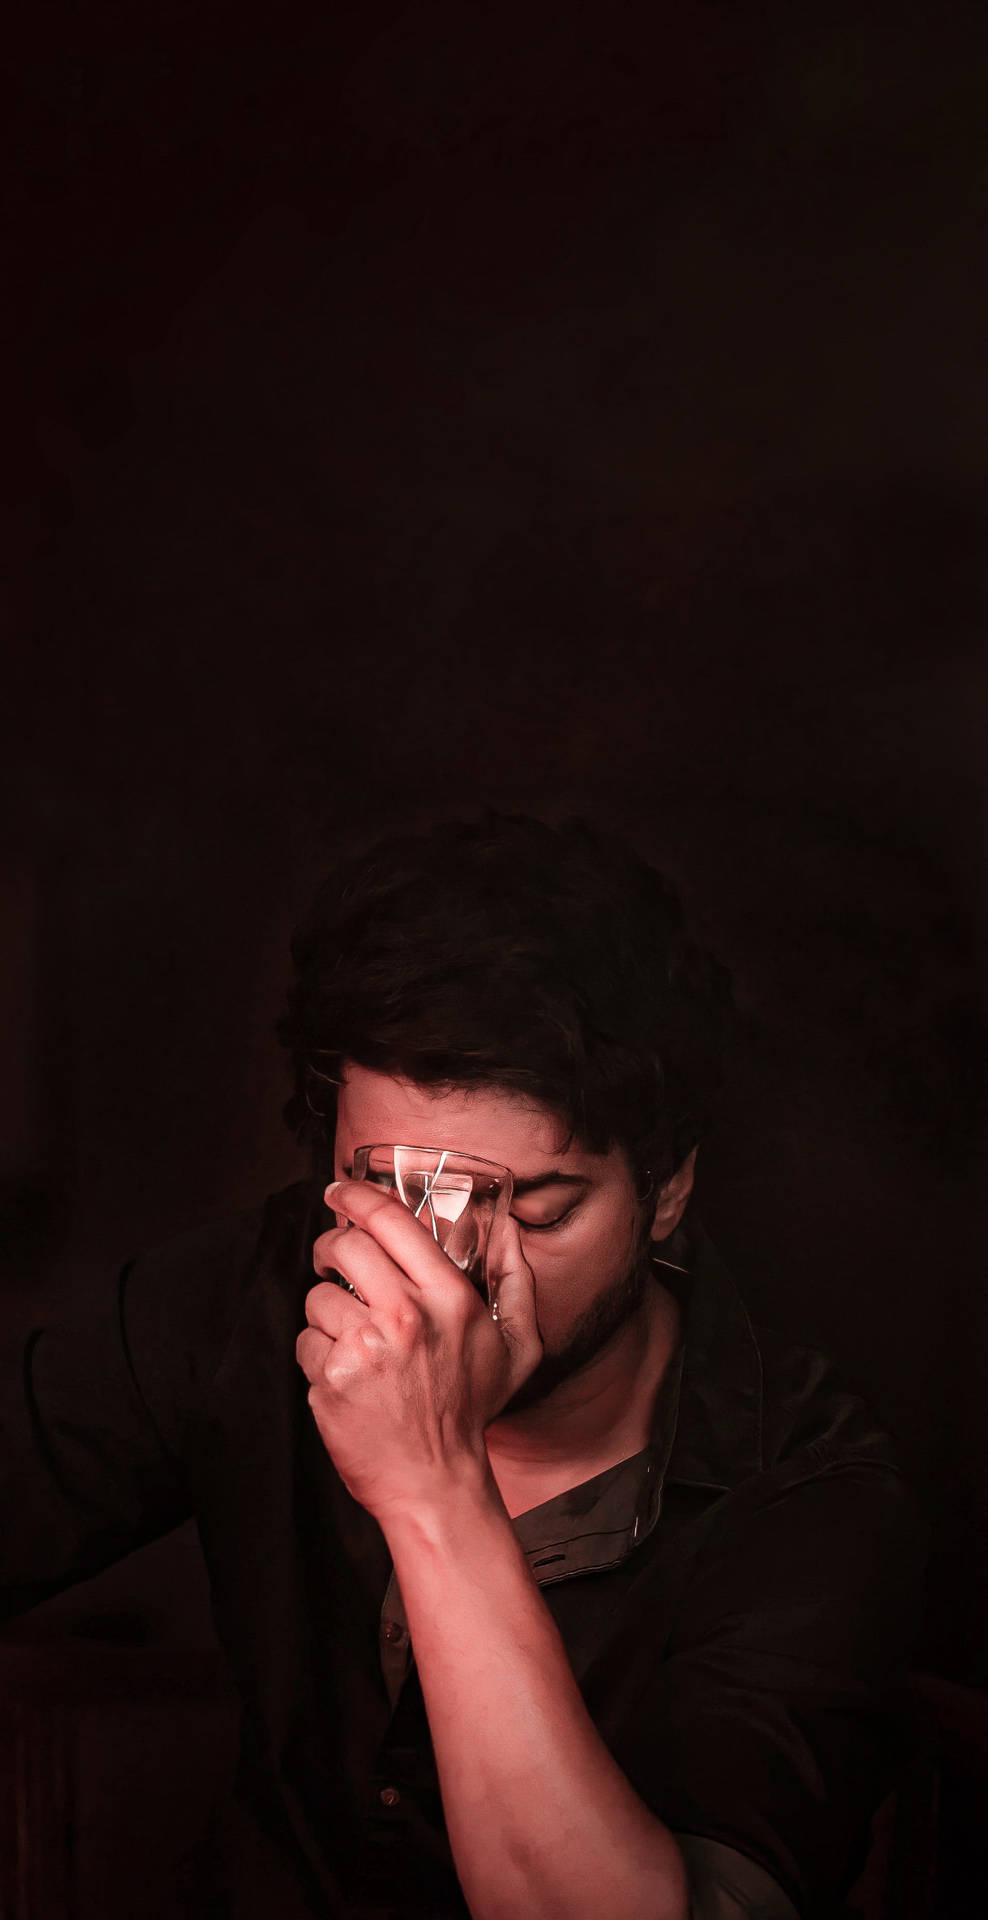 Caption: "South Indian Actor Vijay in a Gripping Scene from His Latest Film Master" Wallpaper